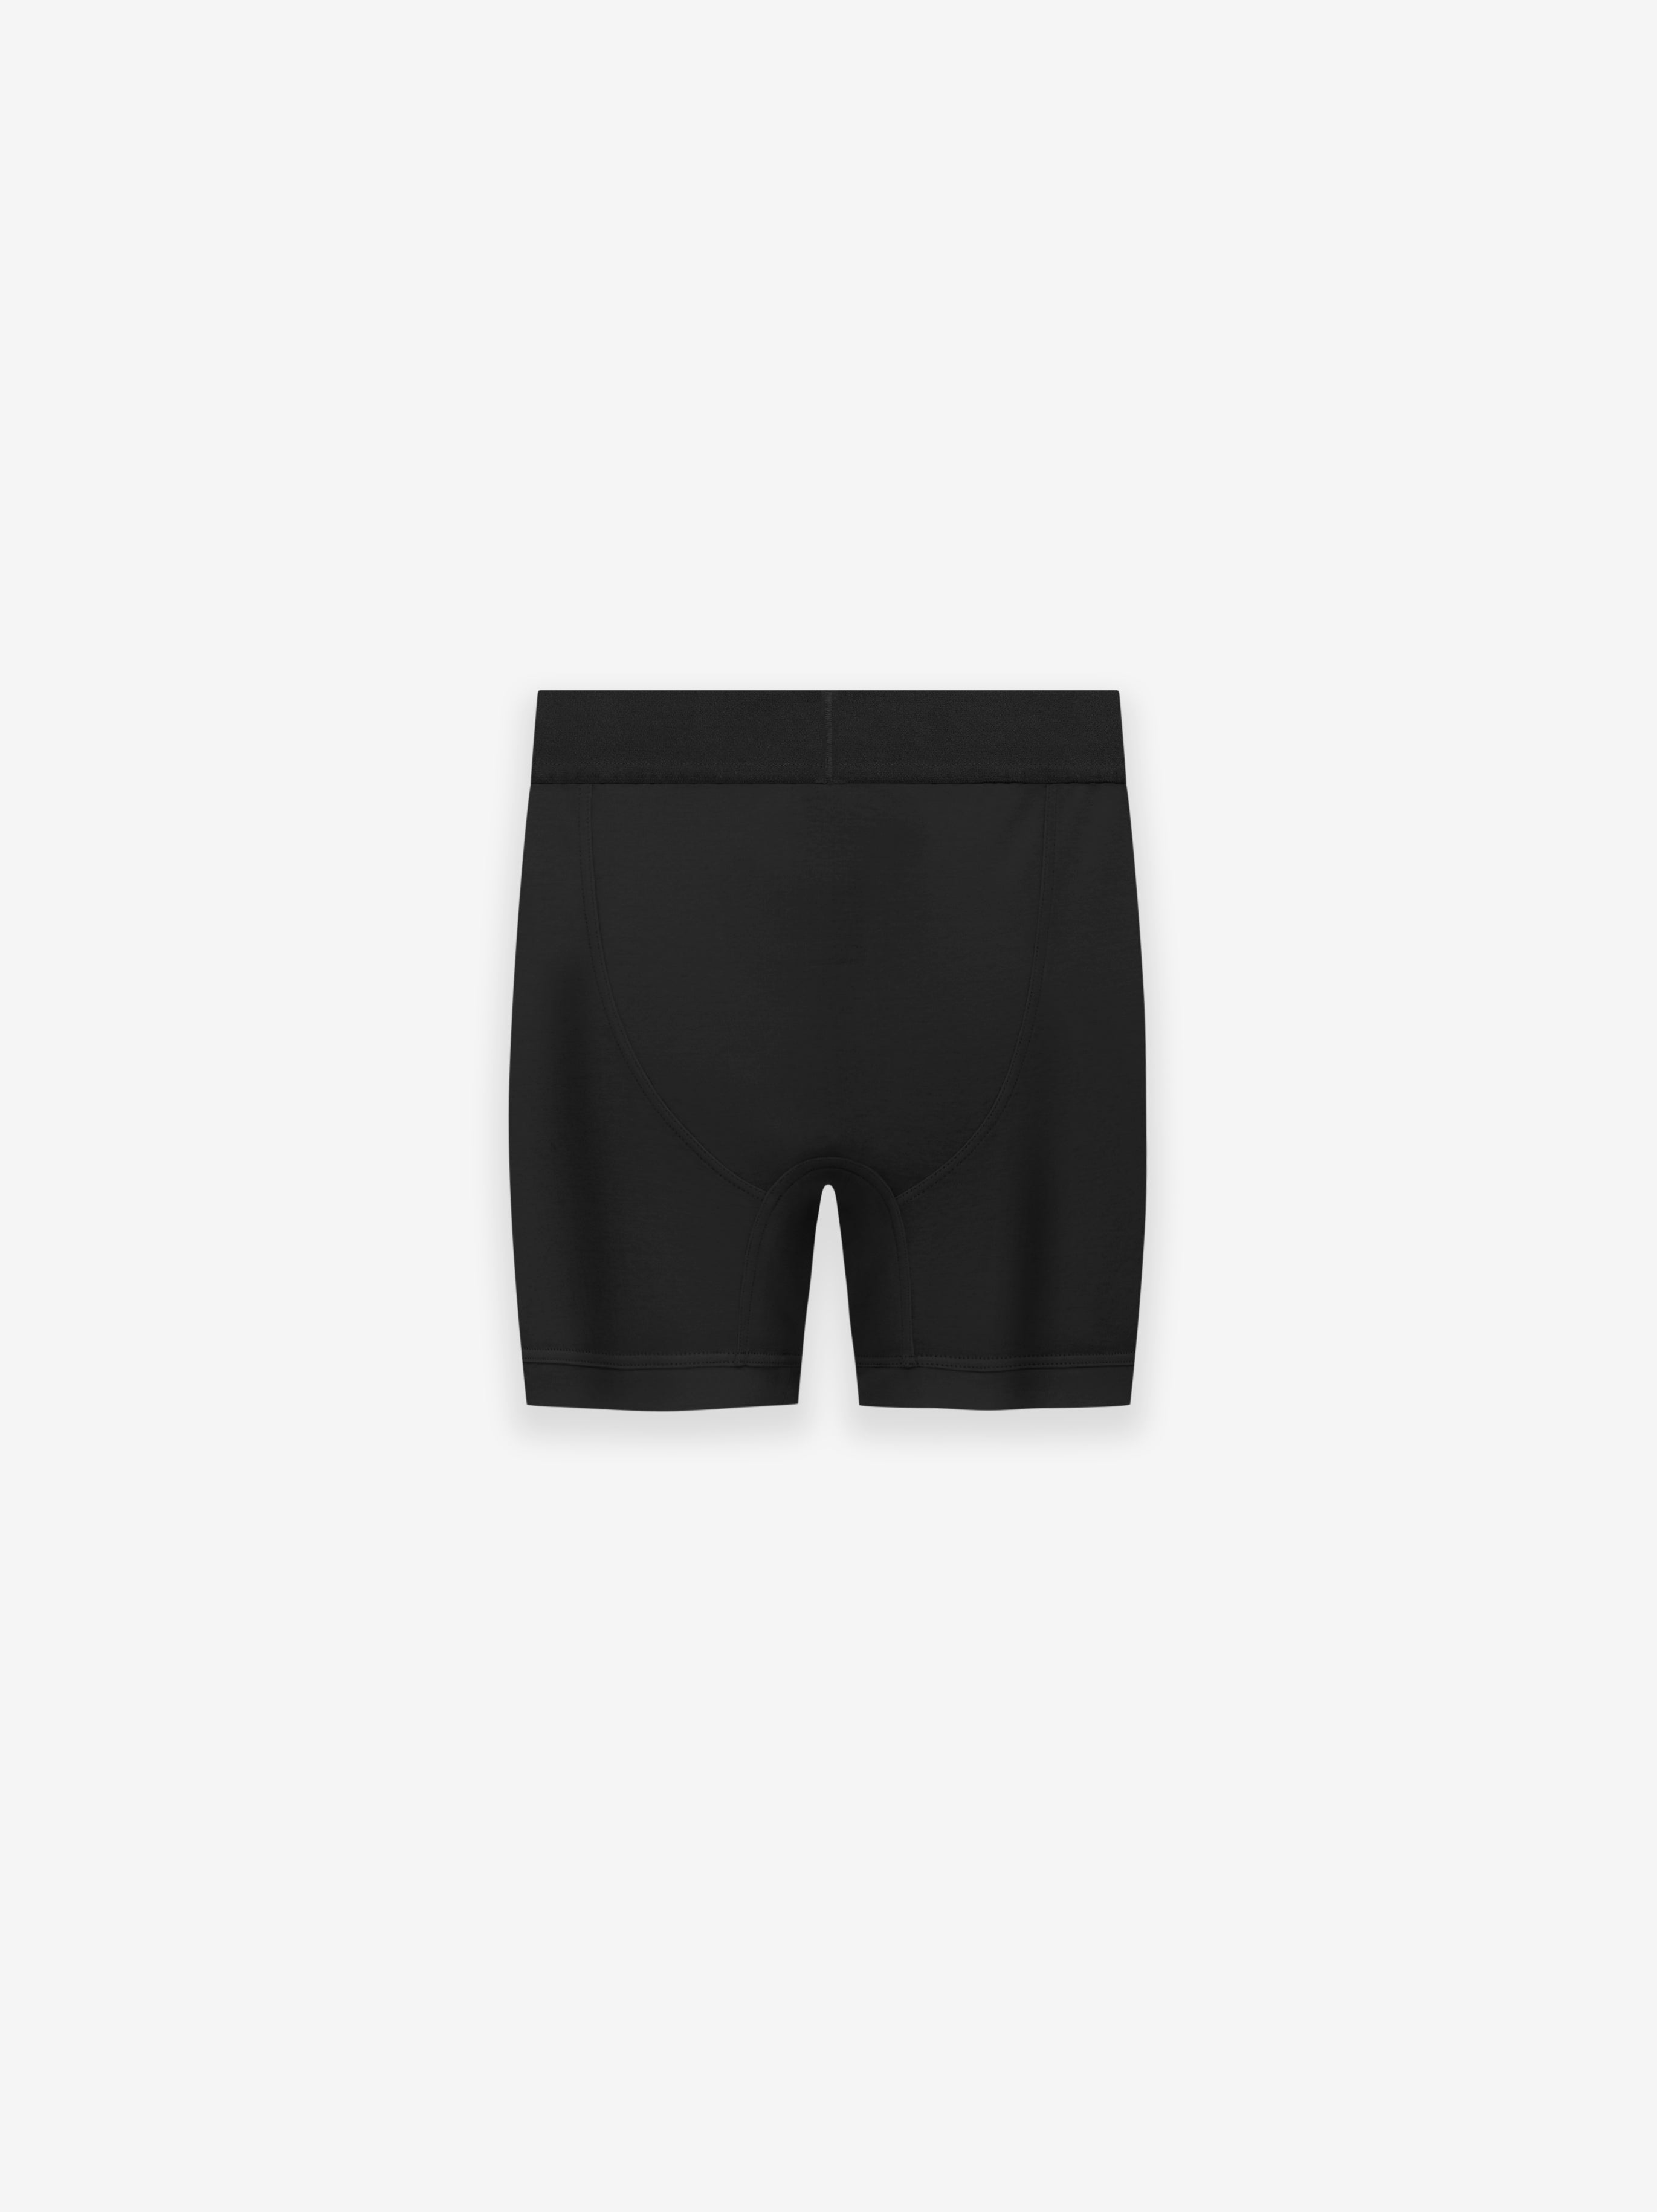 Fear of God Loungewear 2 Pack Boxer Brief in Black